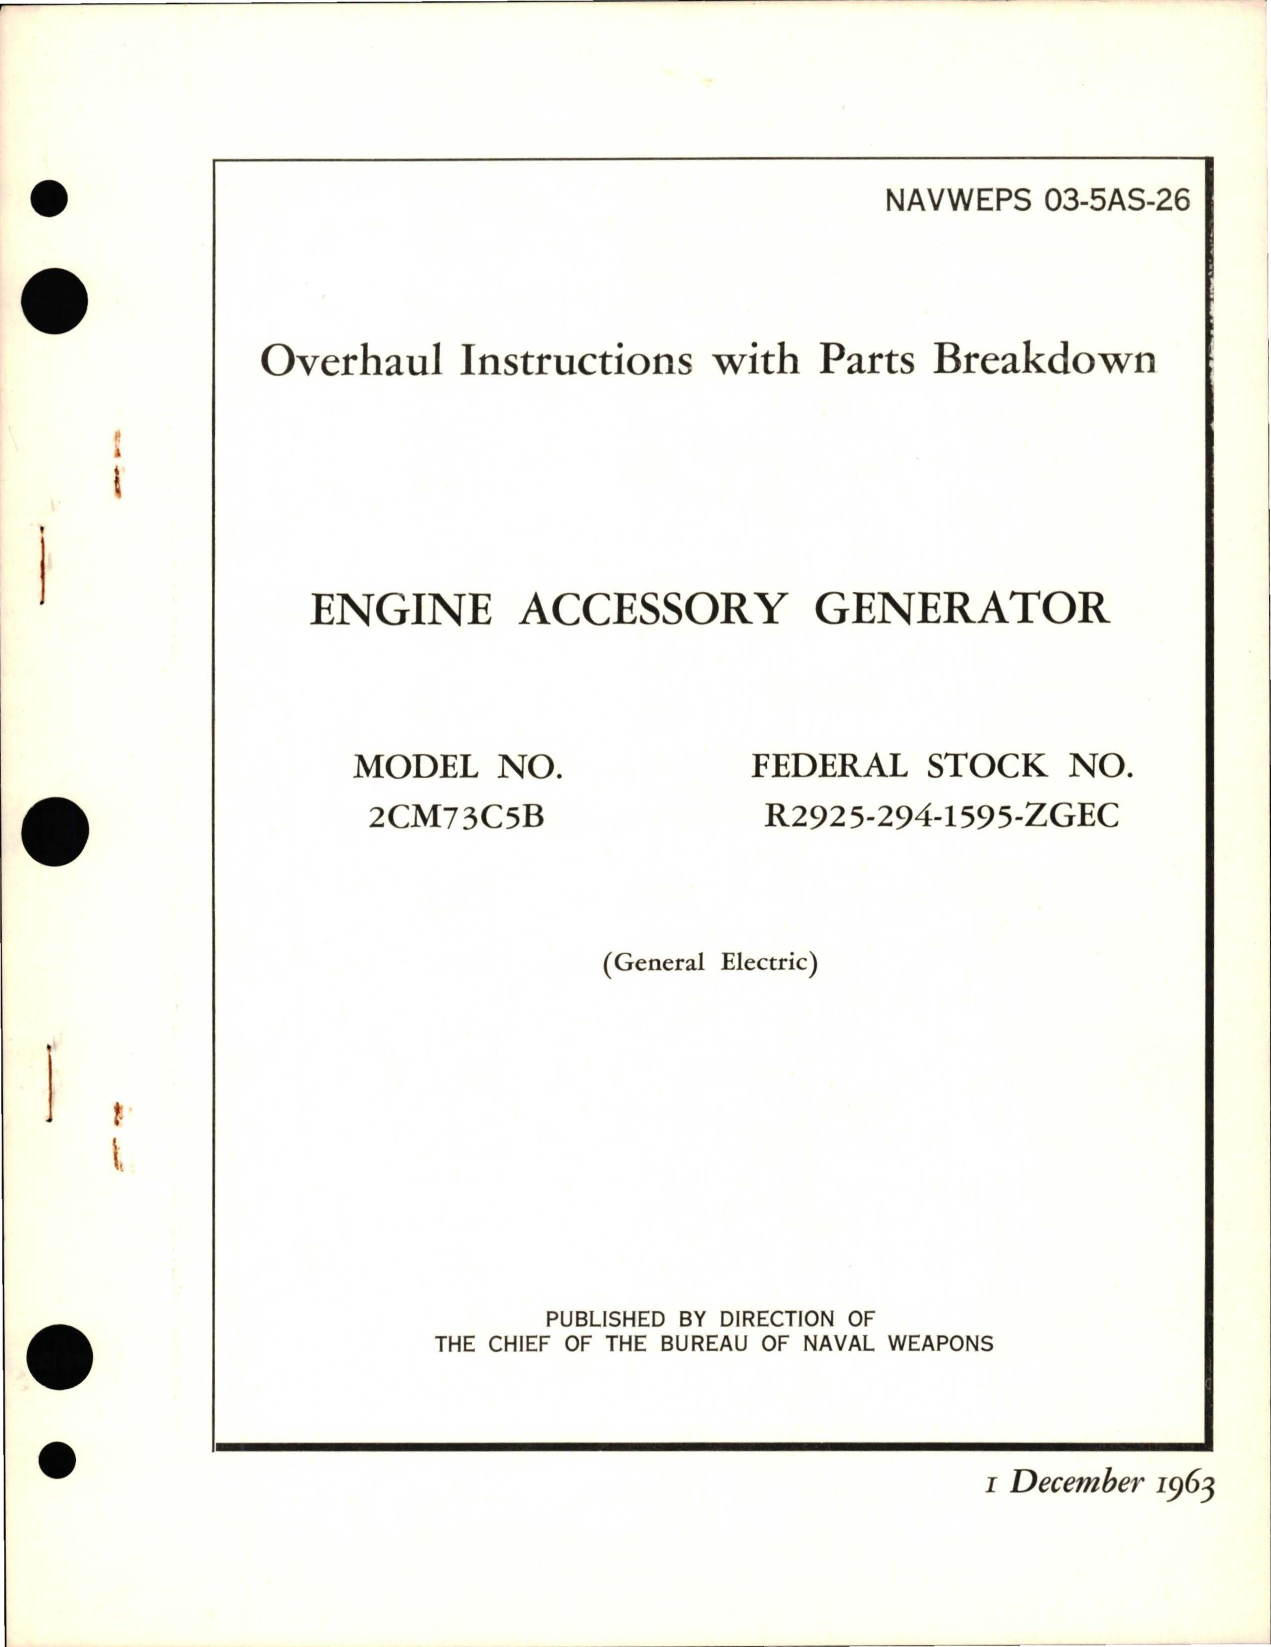 Sample page 1 from AirCorps Library document: Overhaul Instructions with Parts Breakdown for Engine Accessory Generator - Model 2CM73C5B 